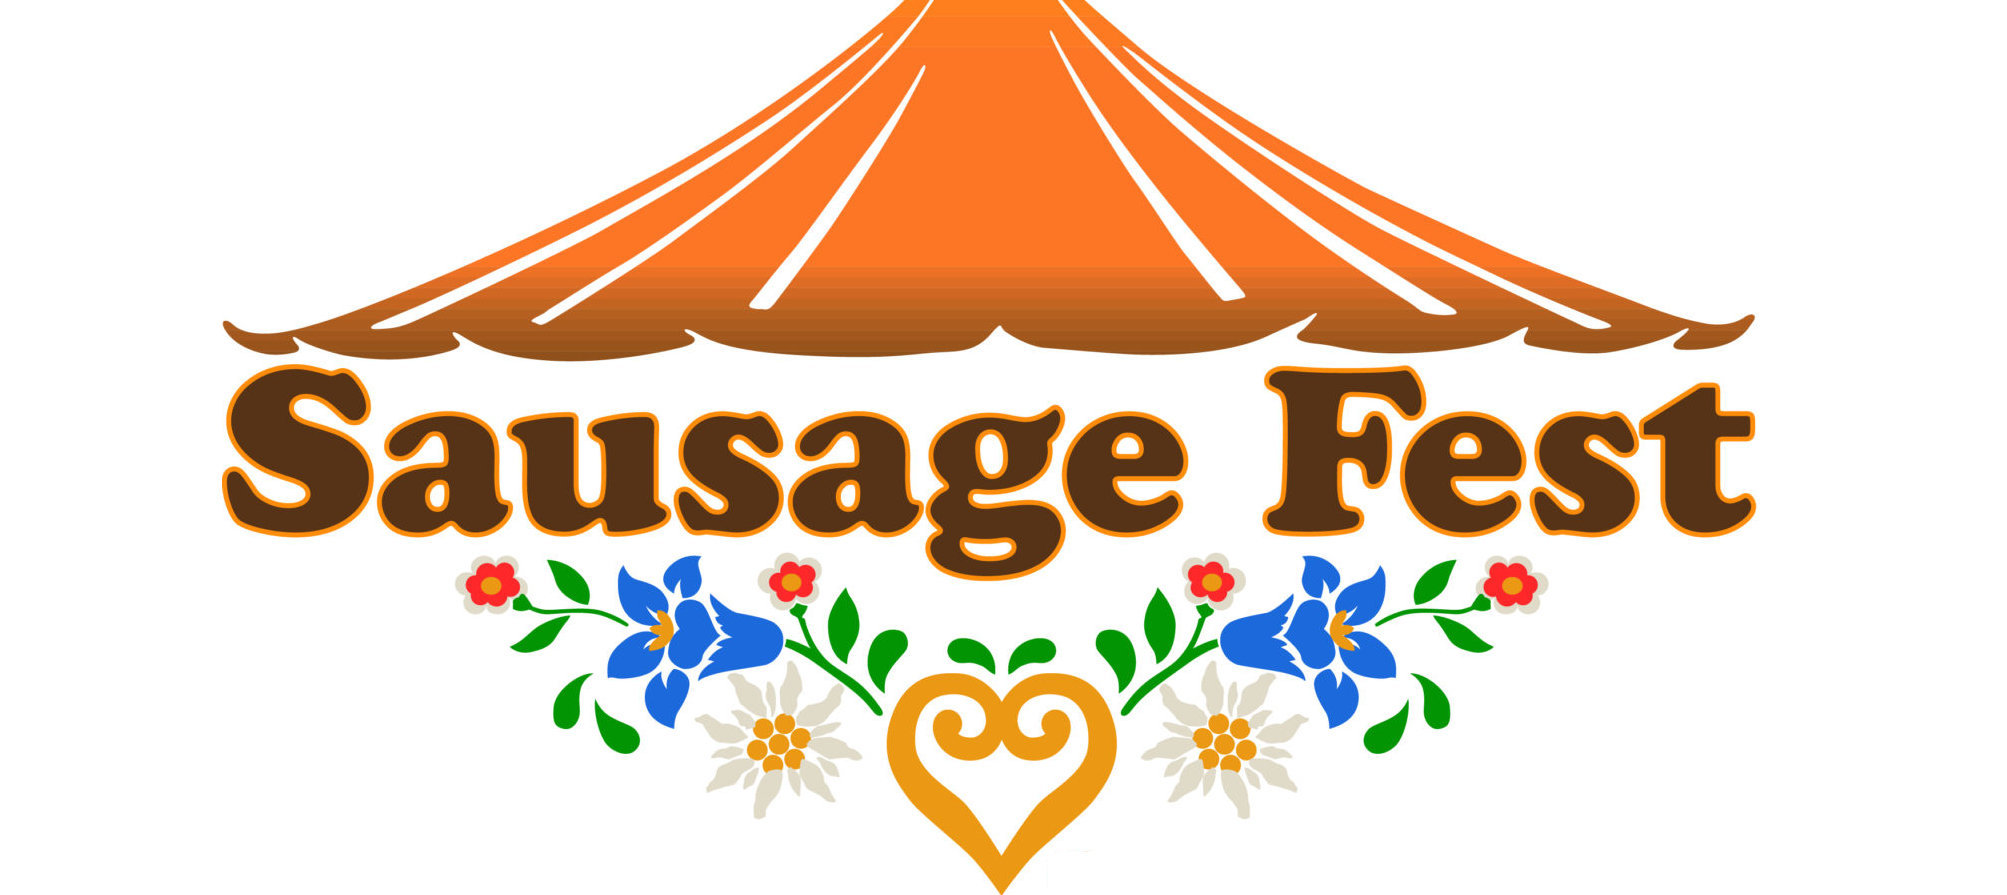 2023 Christ the King Sausage Fest.  You're invited to head out to Christ the King School for the annual Sausage Fest, the primary fundraising event for the new school year.